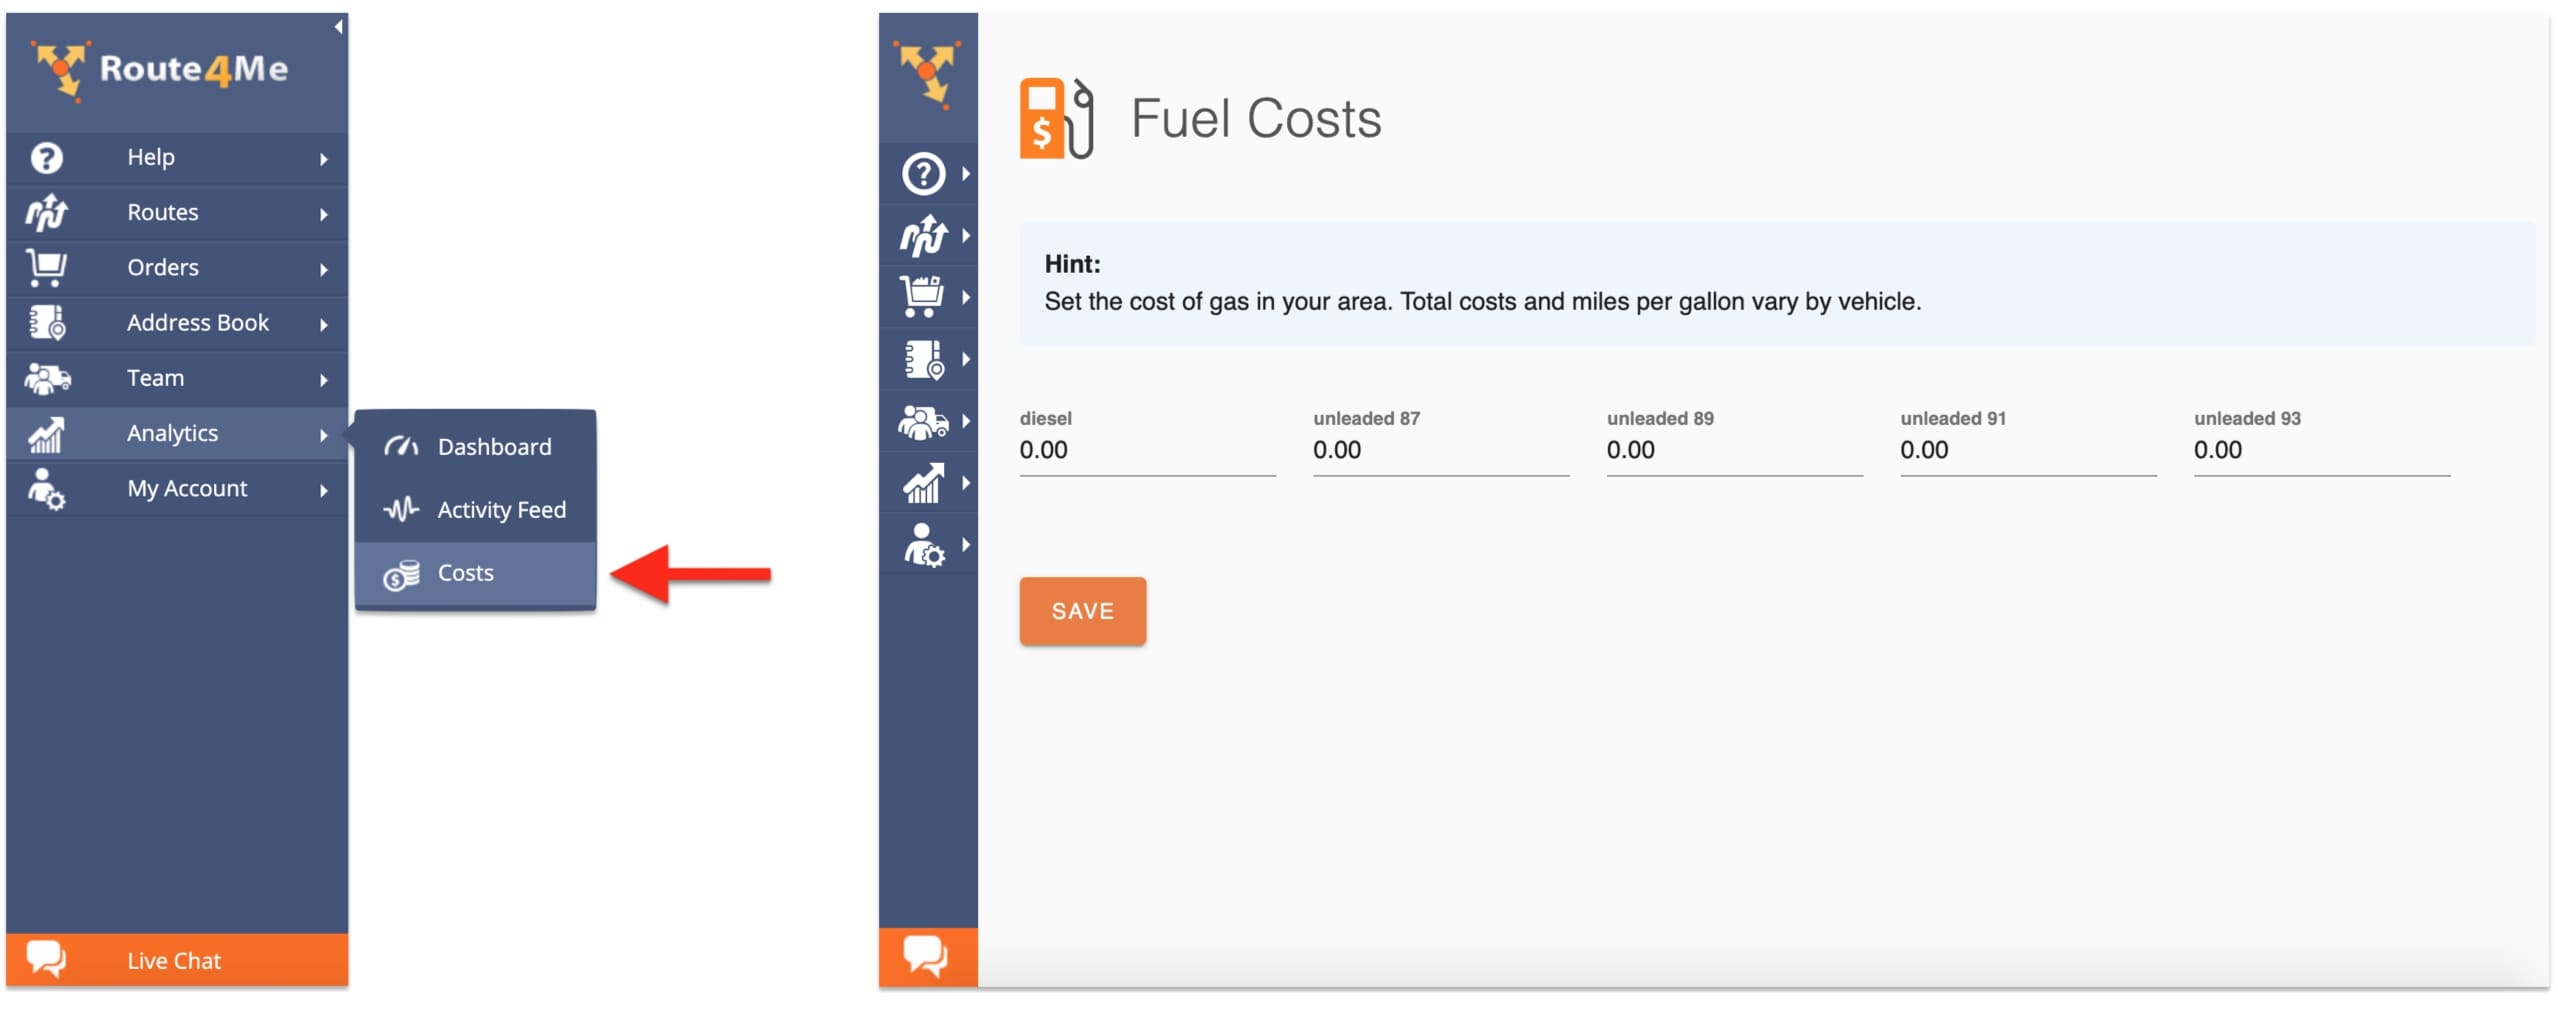 Track fuel costs and vehicles' fuel consumption with route optimization software with fleet management capabilities.